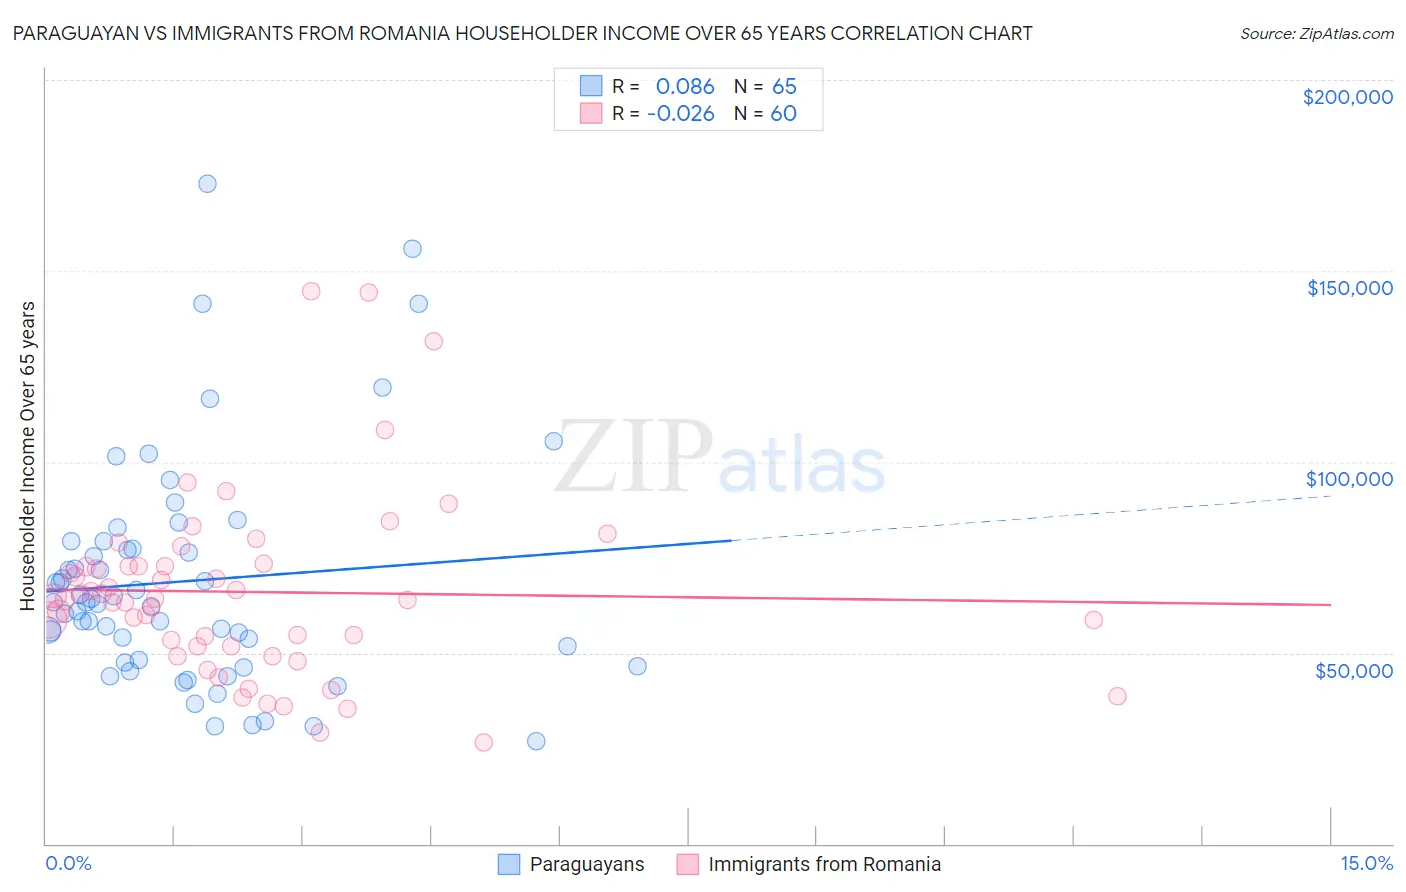 Paraguayan vs Immigrants from Romania Householder Income Over 65 years